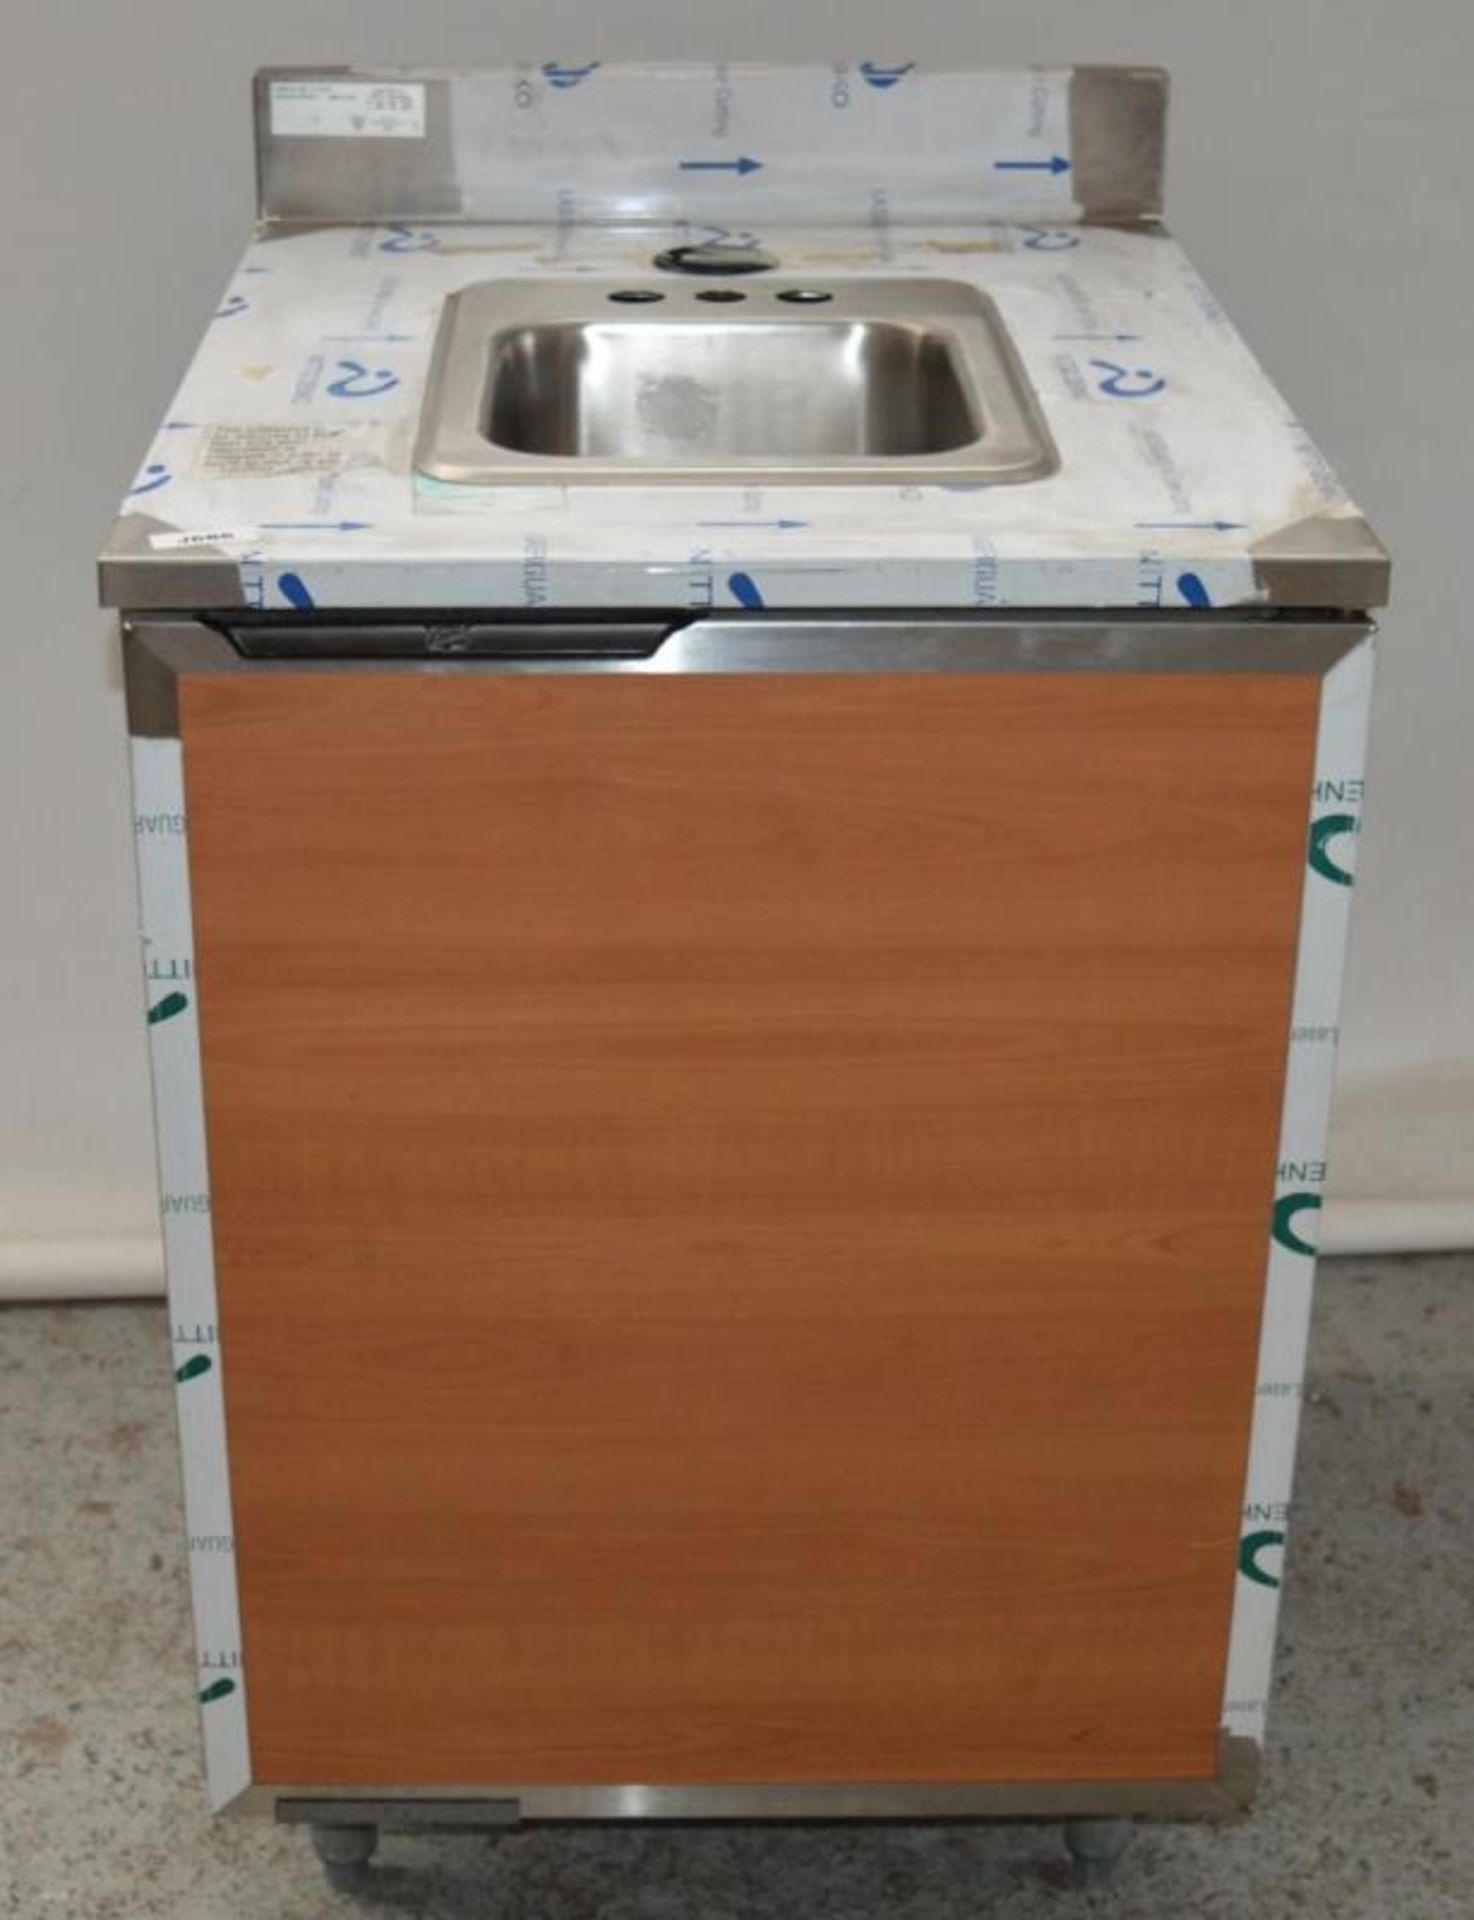 1 x Duke Stainless Steel Sink Basin Unit With Wood Finish Cabinet - Unused With Protective Film - Image 2 of 7